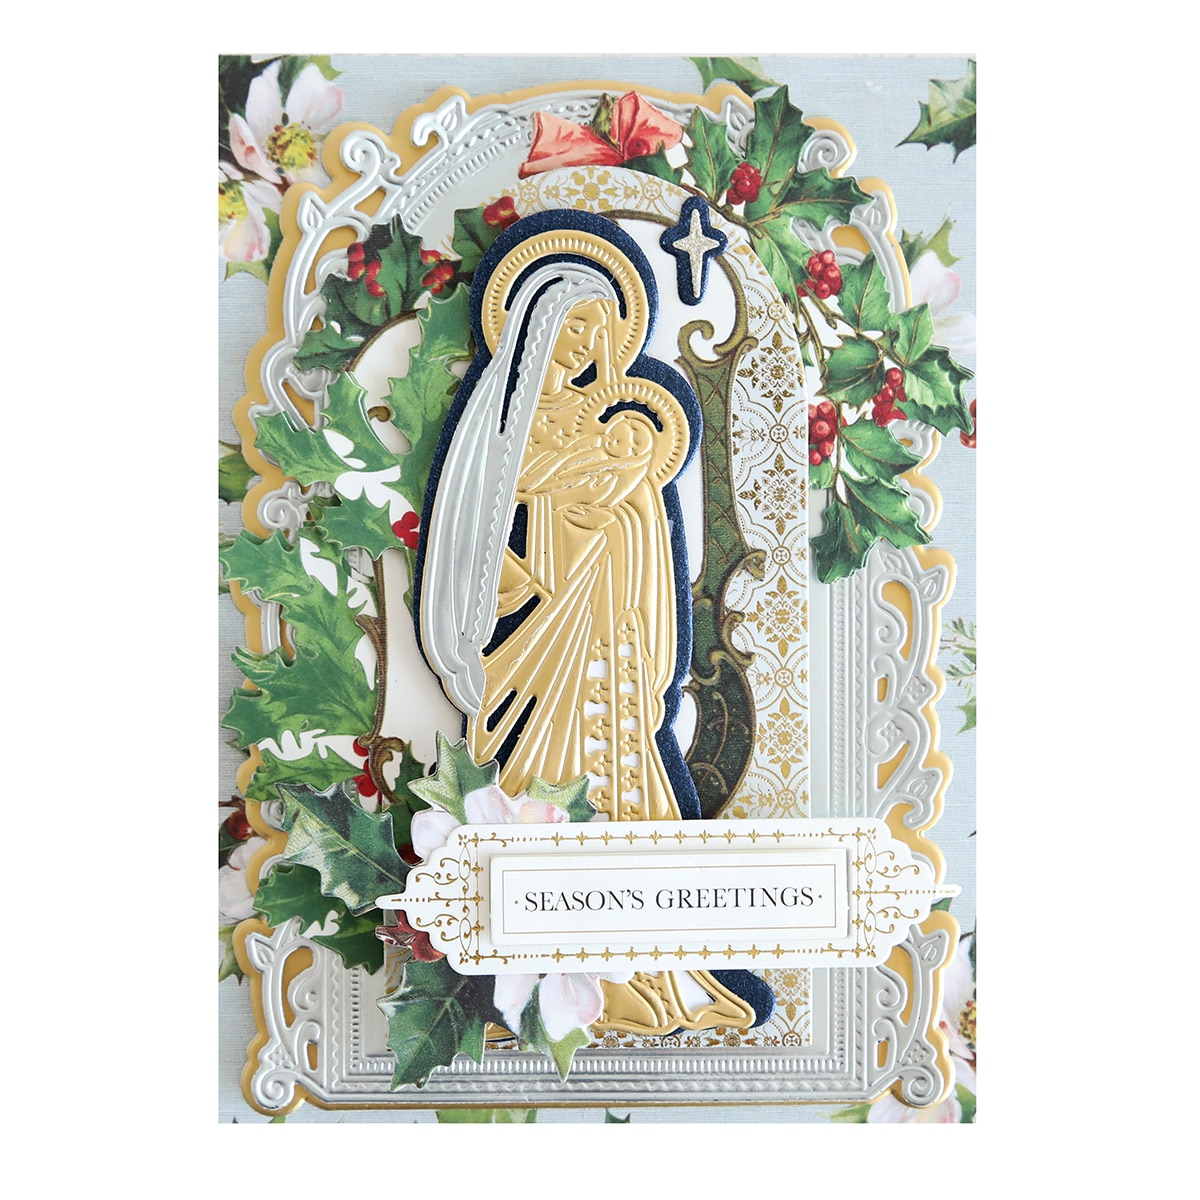 A christmas card with the image of the virgin mary.